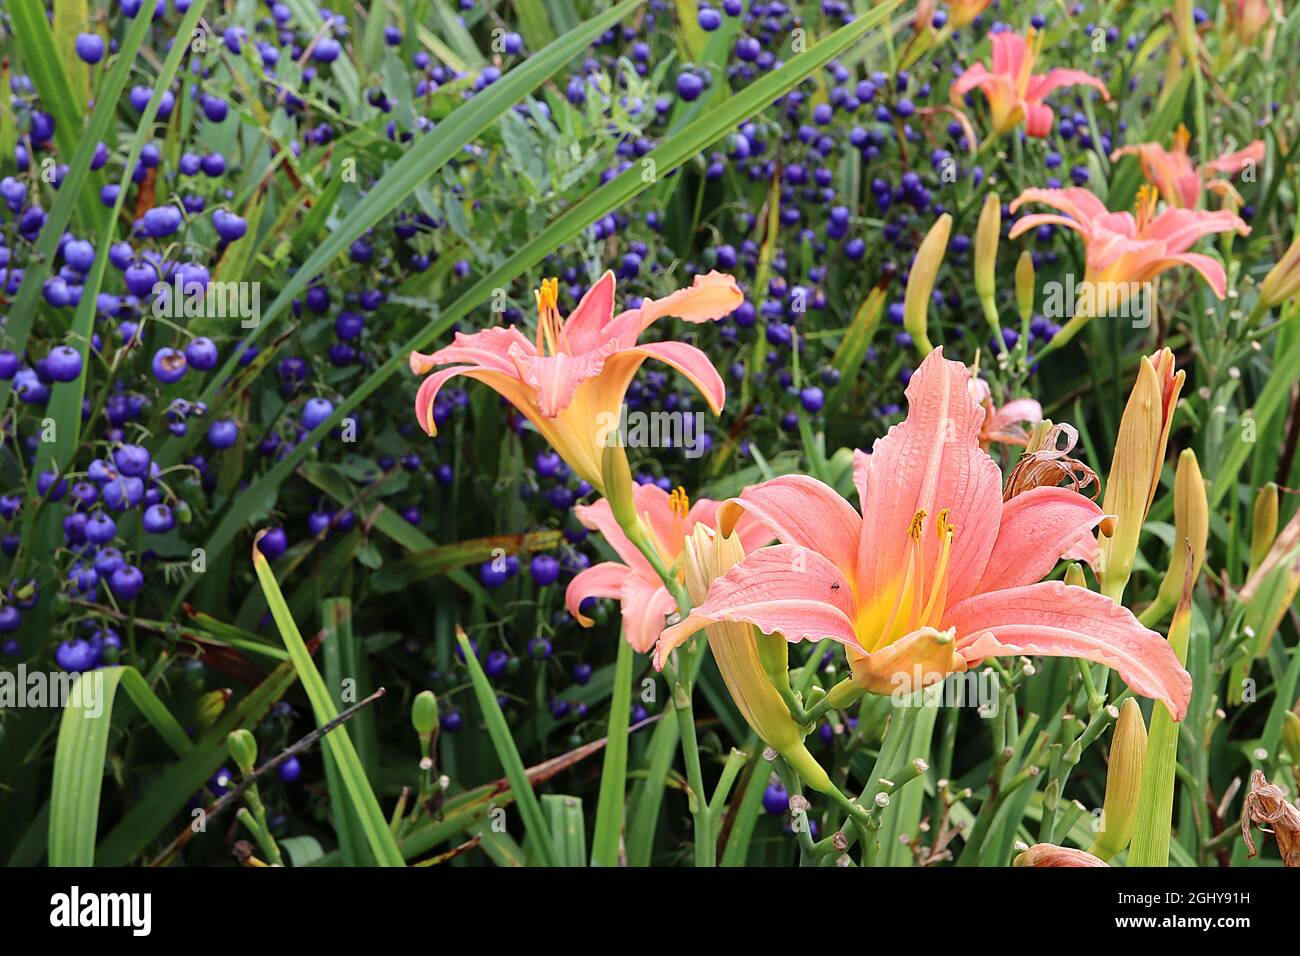 Dianella tasmanica  Tasman flax-lily – oval violet blue glossy berries, Hemerocallis / Daylily ‘Pink Damask’ funnel-shaped coral pink flowers, August, Stock Photo